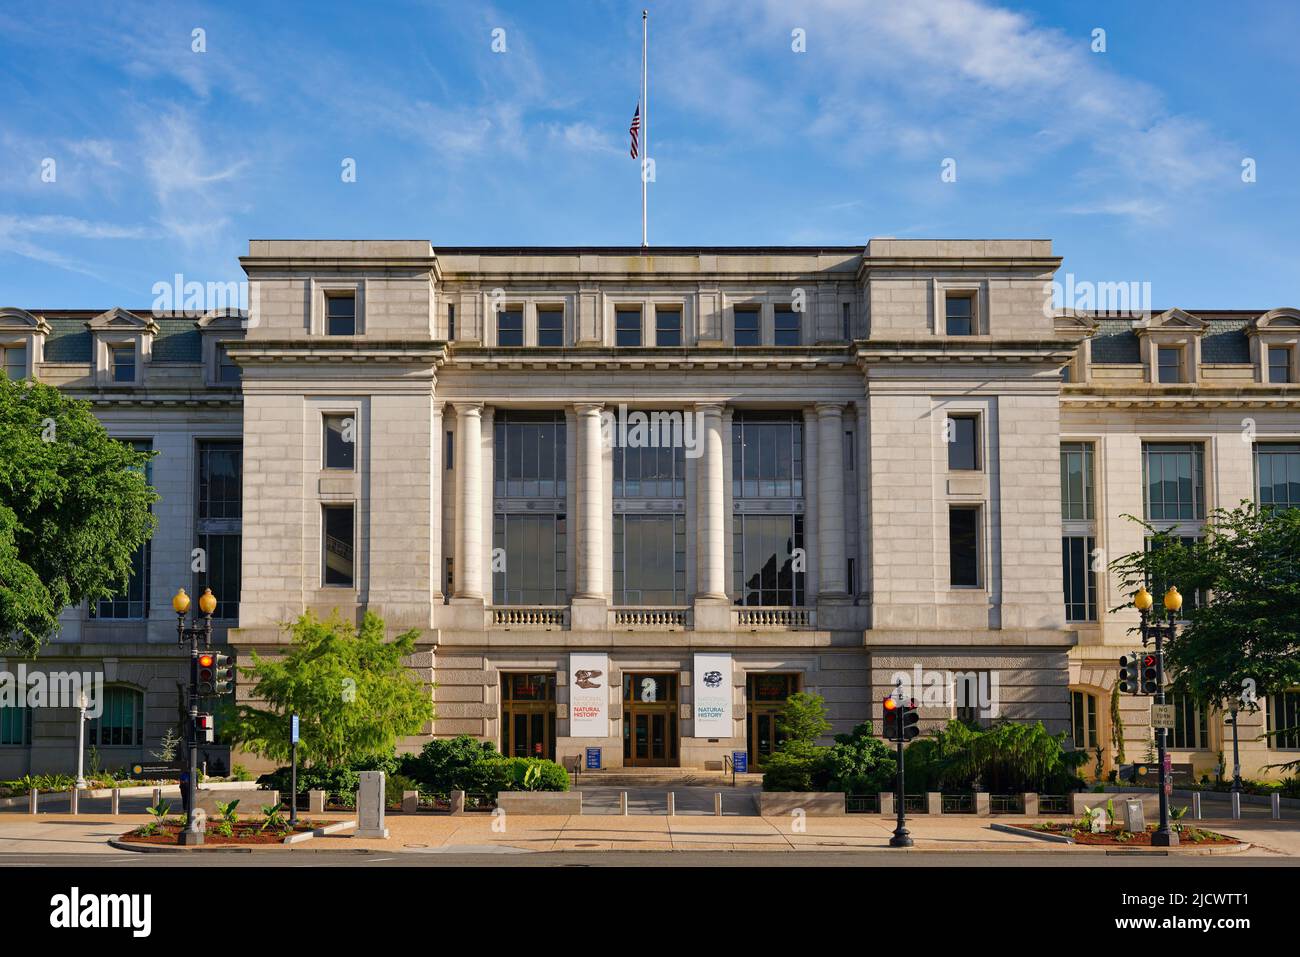 National Museum of Natural History in Washington, D.C., USA. Natural History museum administered by the Smithsonian Institution. Stock Photo